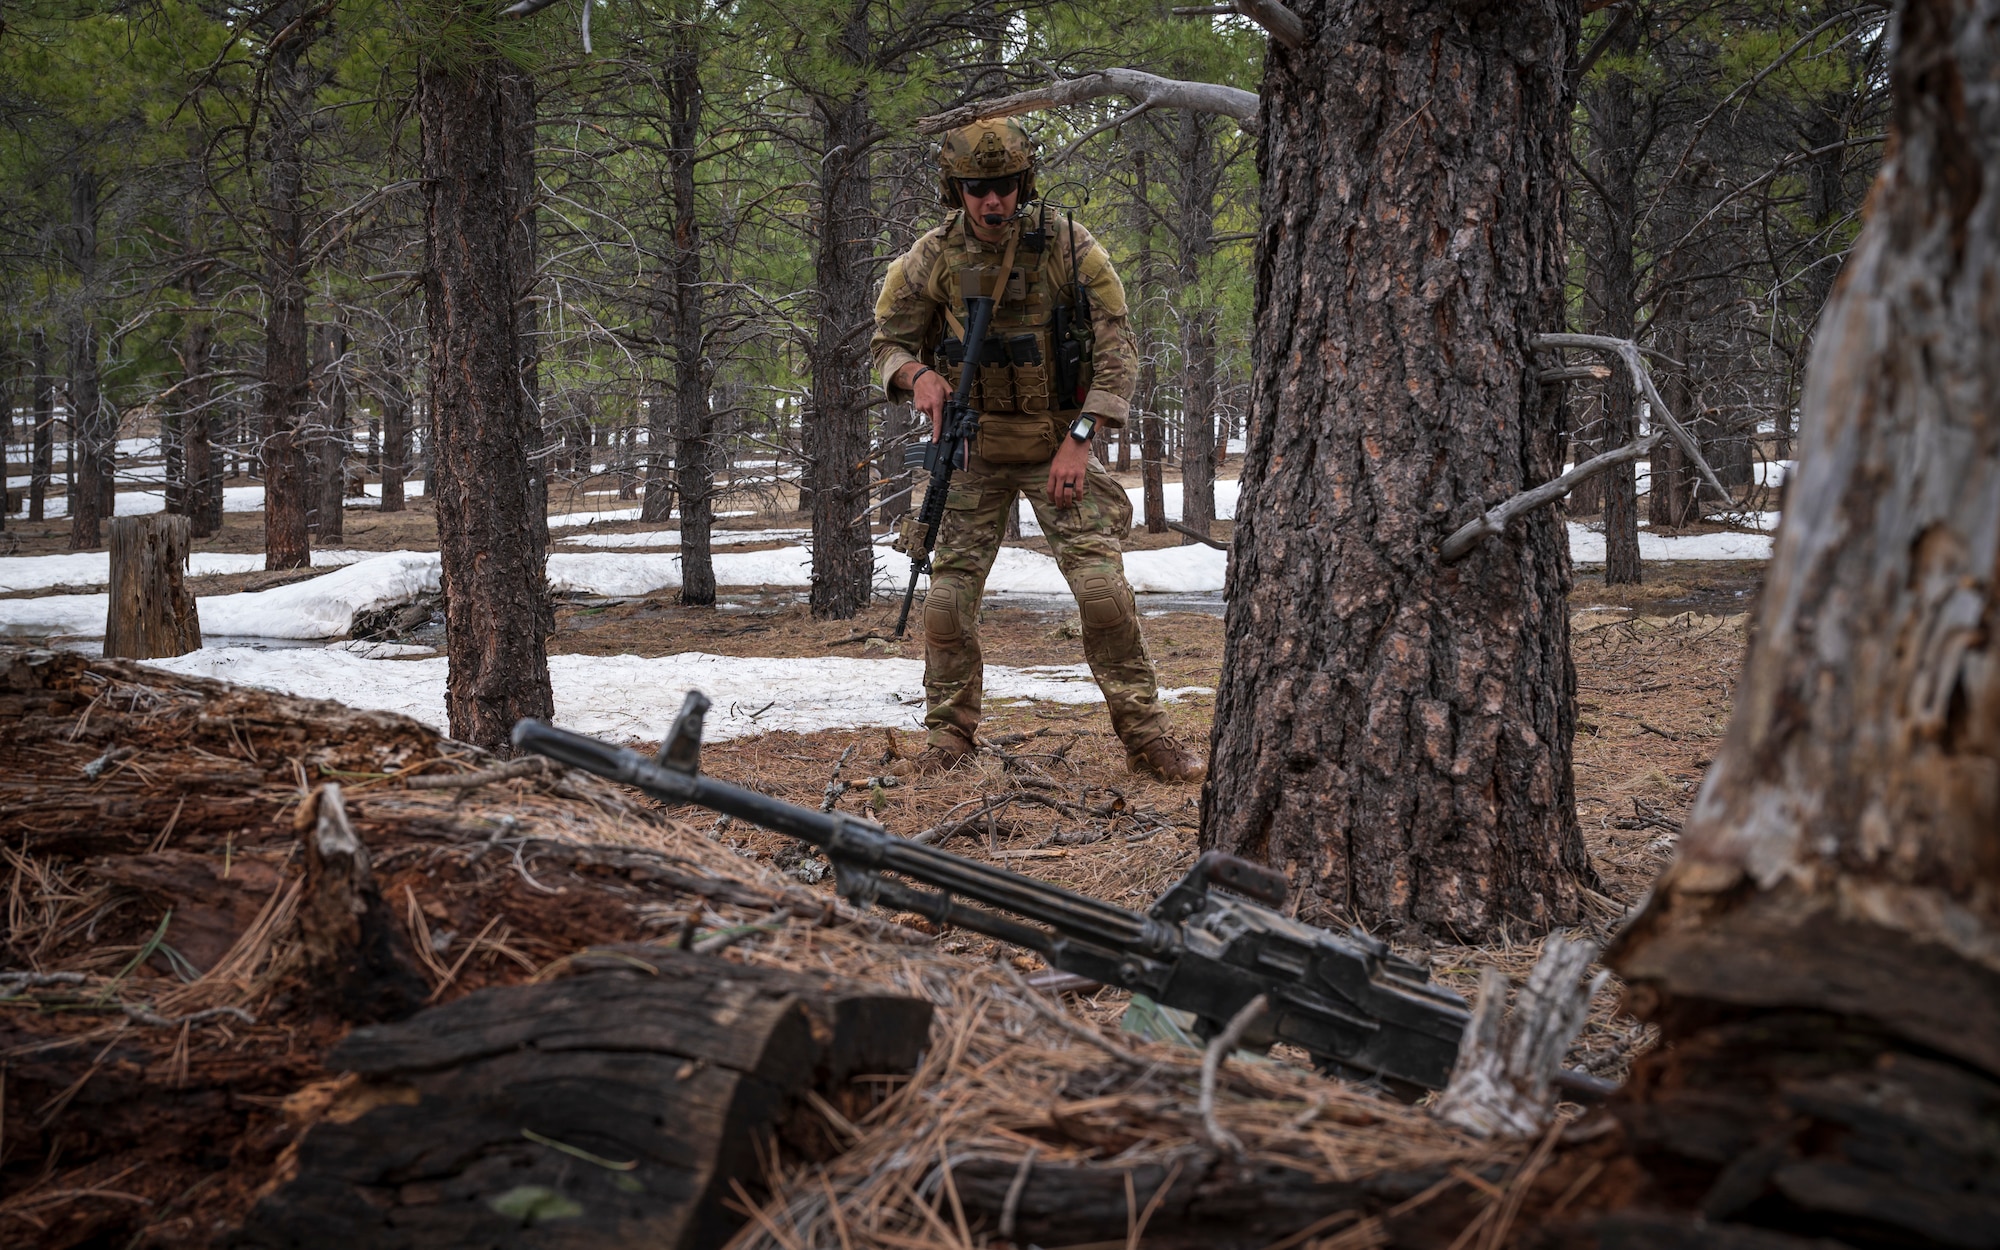 U.S. Air Force Tech. Sgt. Tyler Paul, 56th Civil Engineer Squadron Explosive Ordnance Disposal flight technician, investigates weapons that have been left behind outside a mock village during a training scenario at Camp Navajo, Arizona, April 12, 2023.